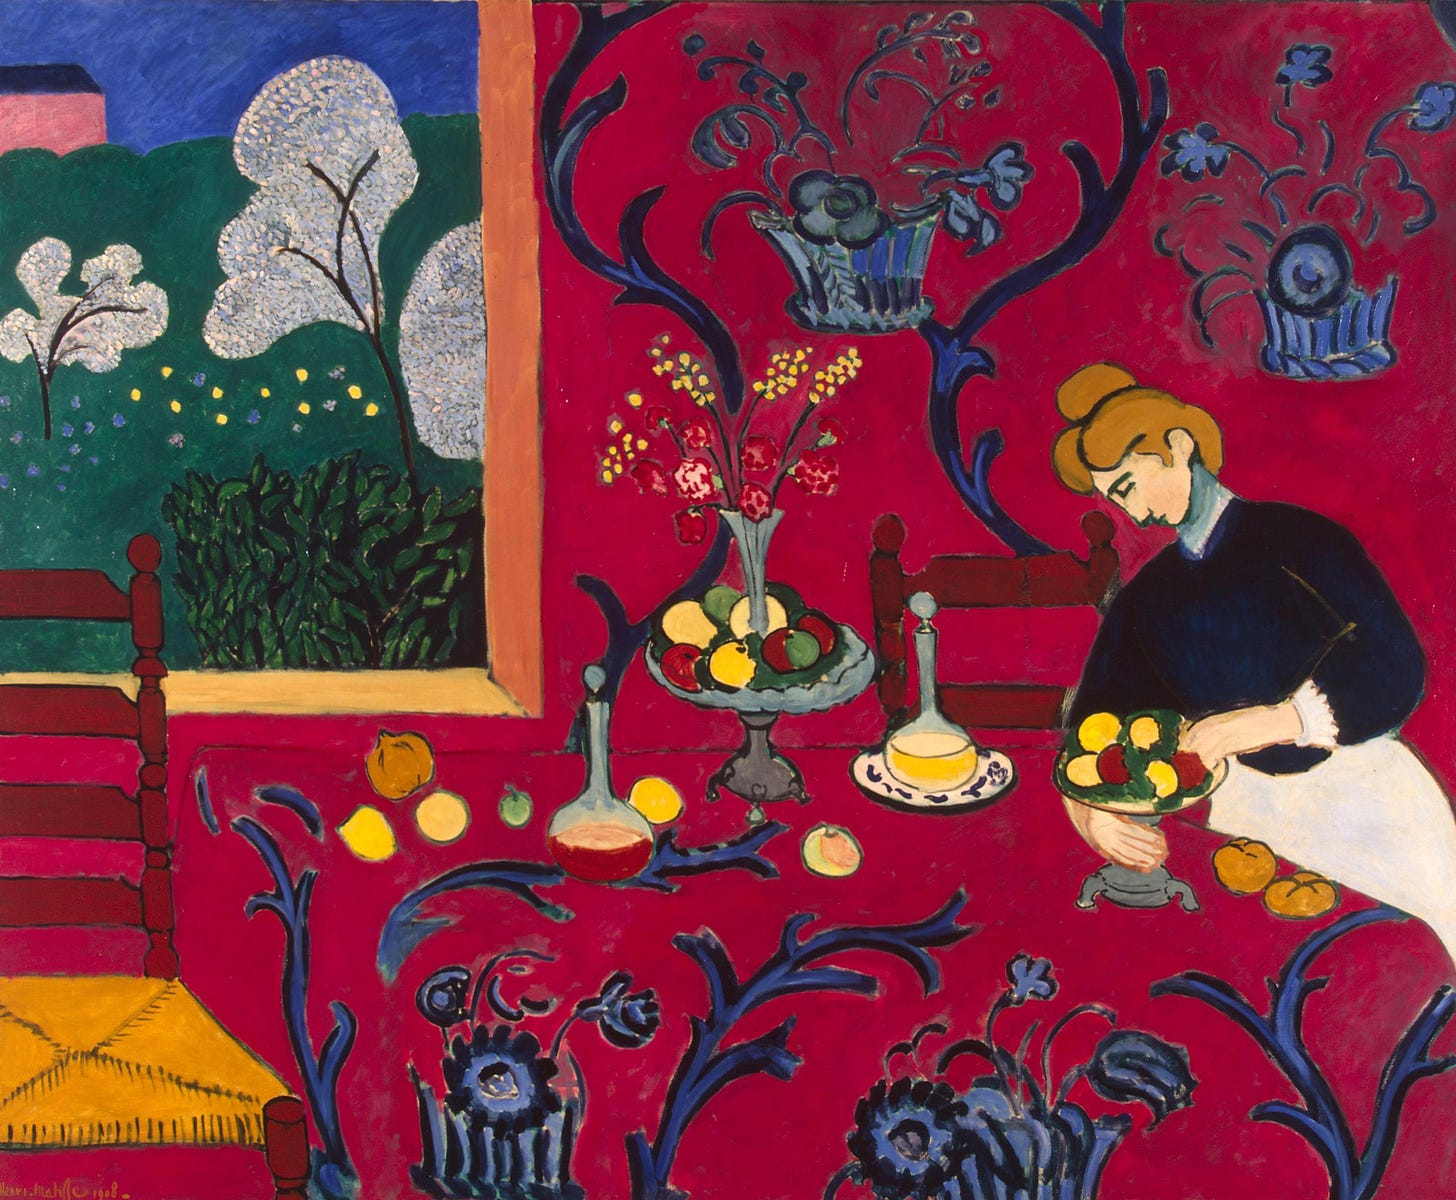 Henri Matisse. The Red Room (also Harmony in Red) (1908) - 3 minutos de arte